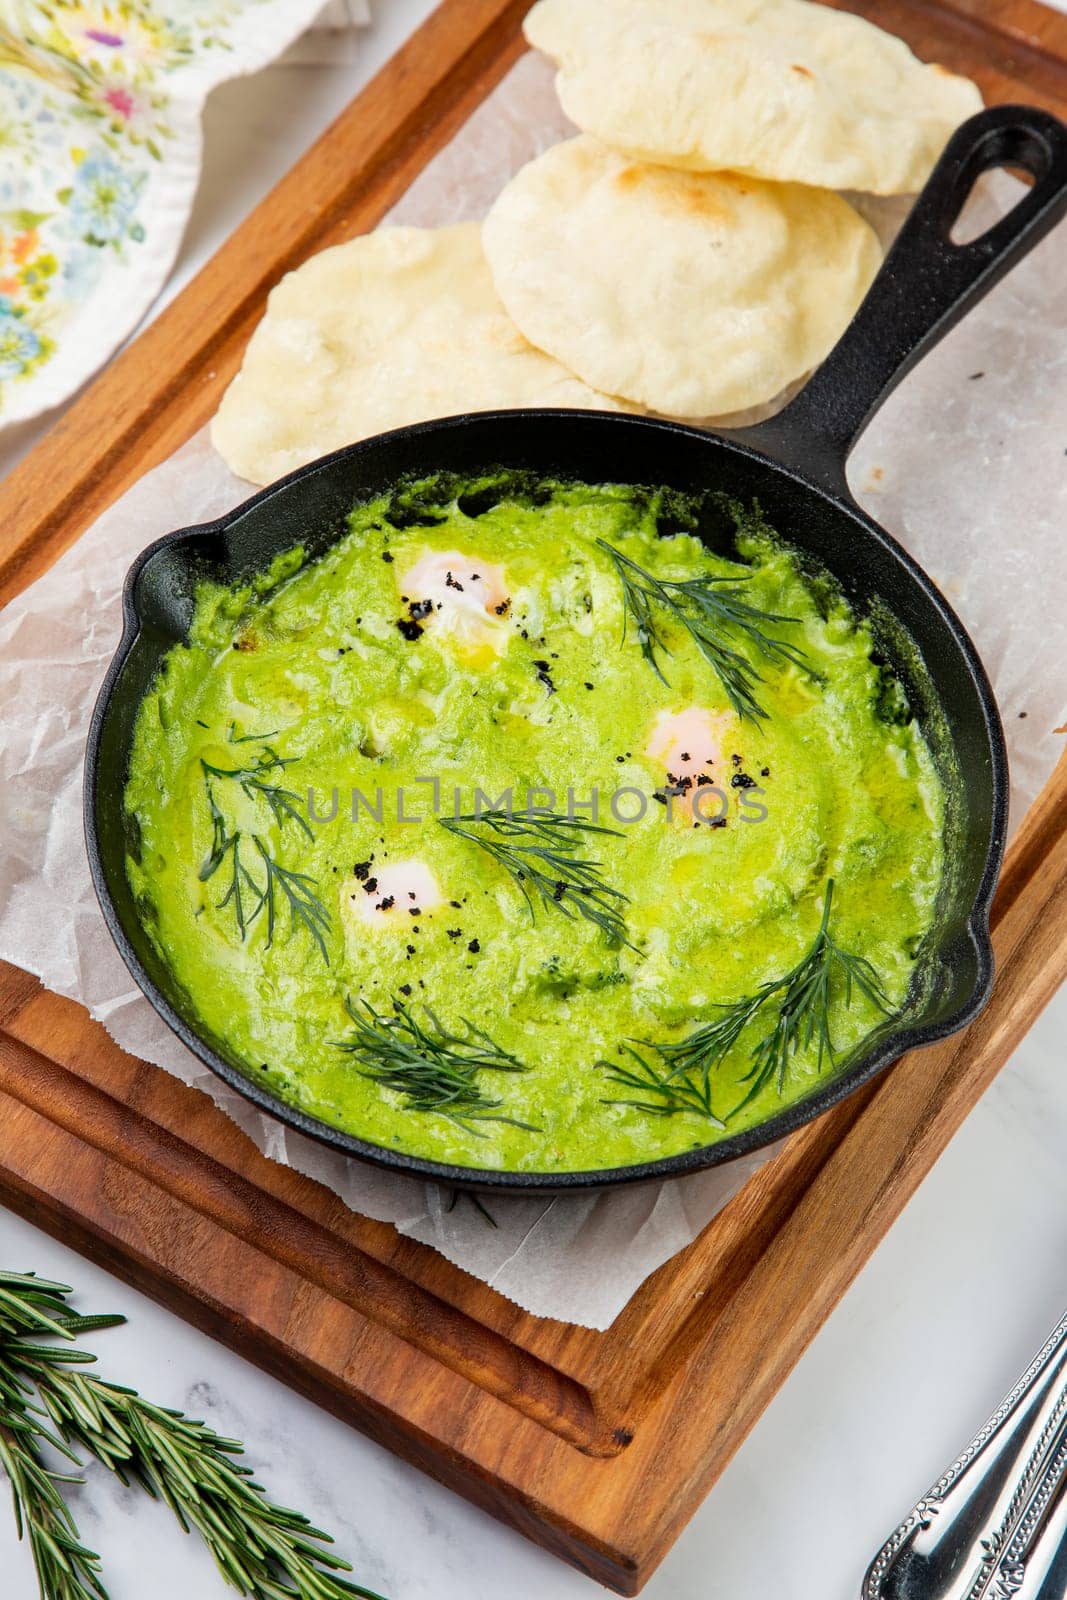 broccoli cream soup with herbs, cheese and tortillas in a frying pan